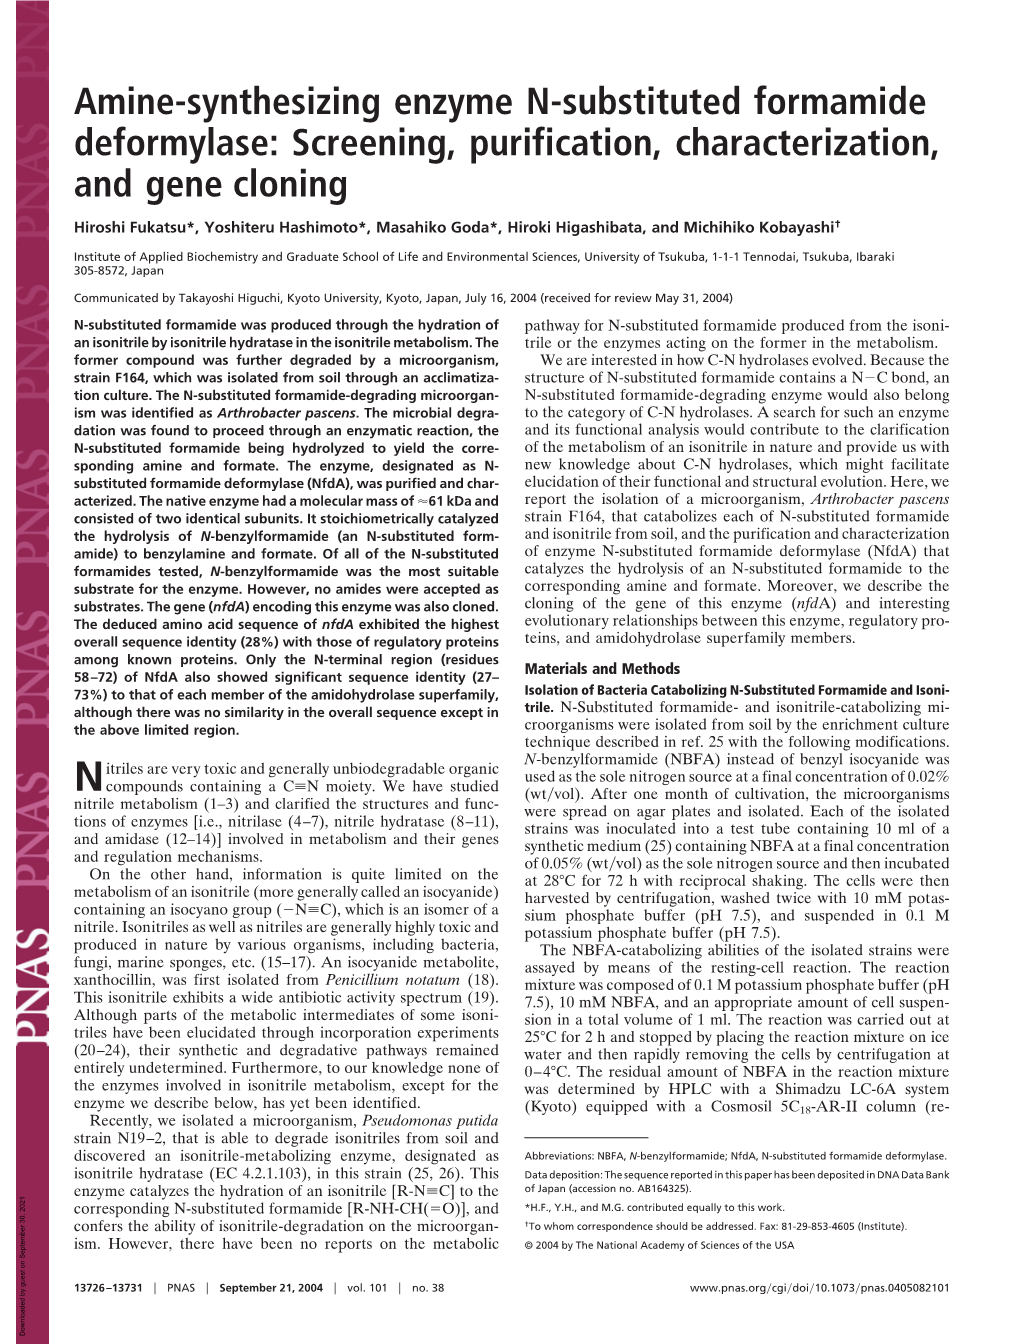 Amine-Synthesizing Enzyme N-Substituted Formamide Deformylase: Screening, Purification, Characterization, and Gene Cloning